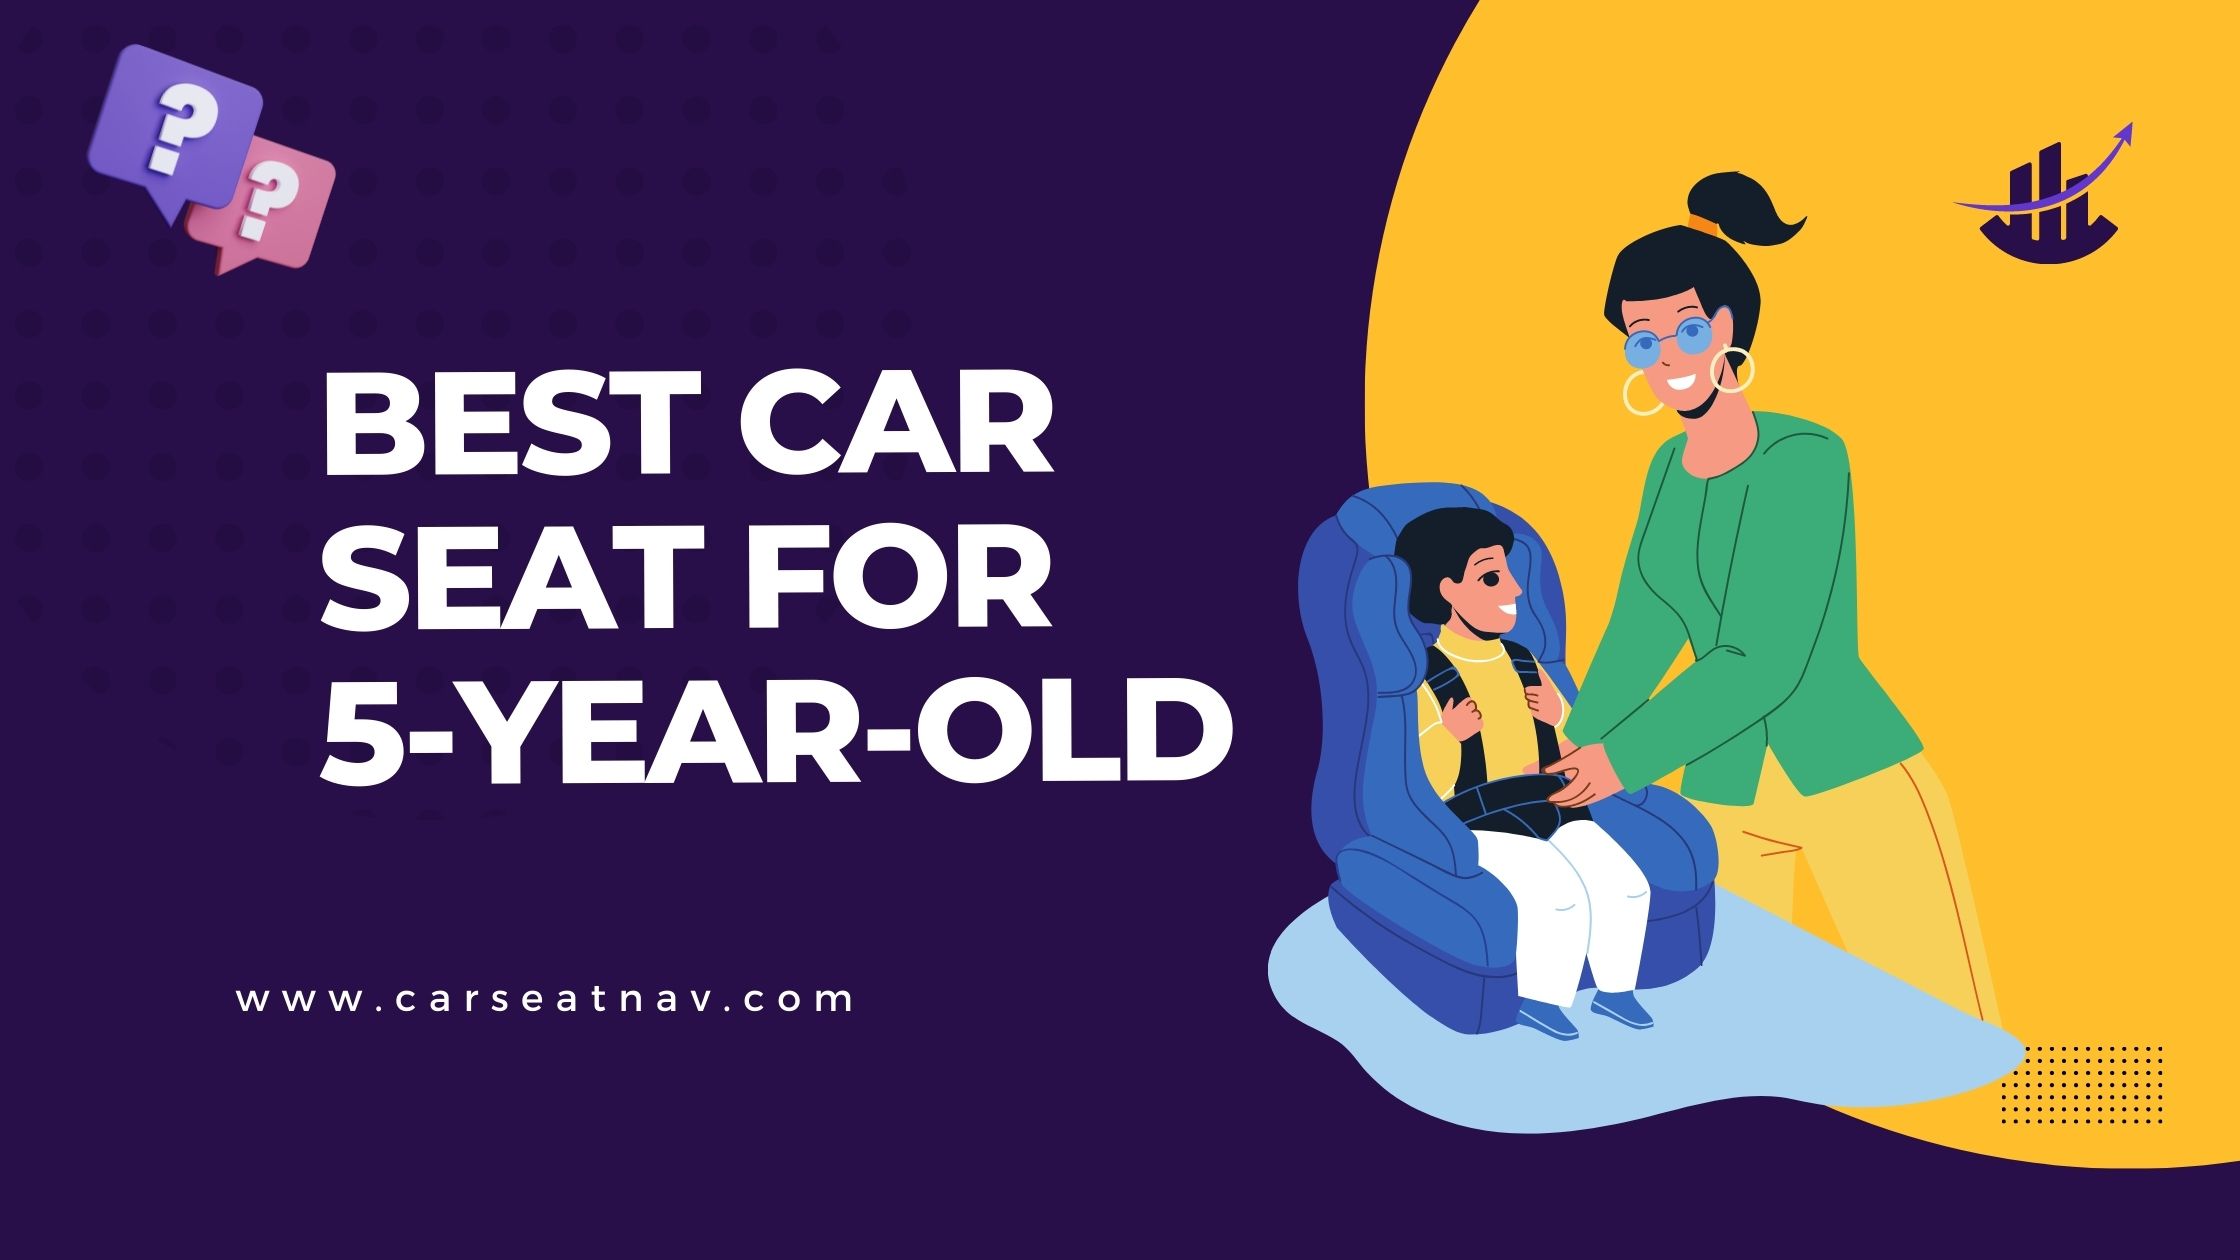 Best Car Seat for 5-Year-Old - carseatnav